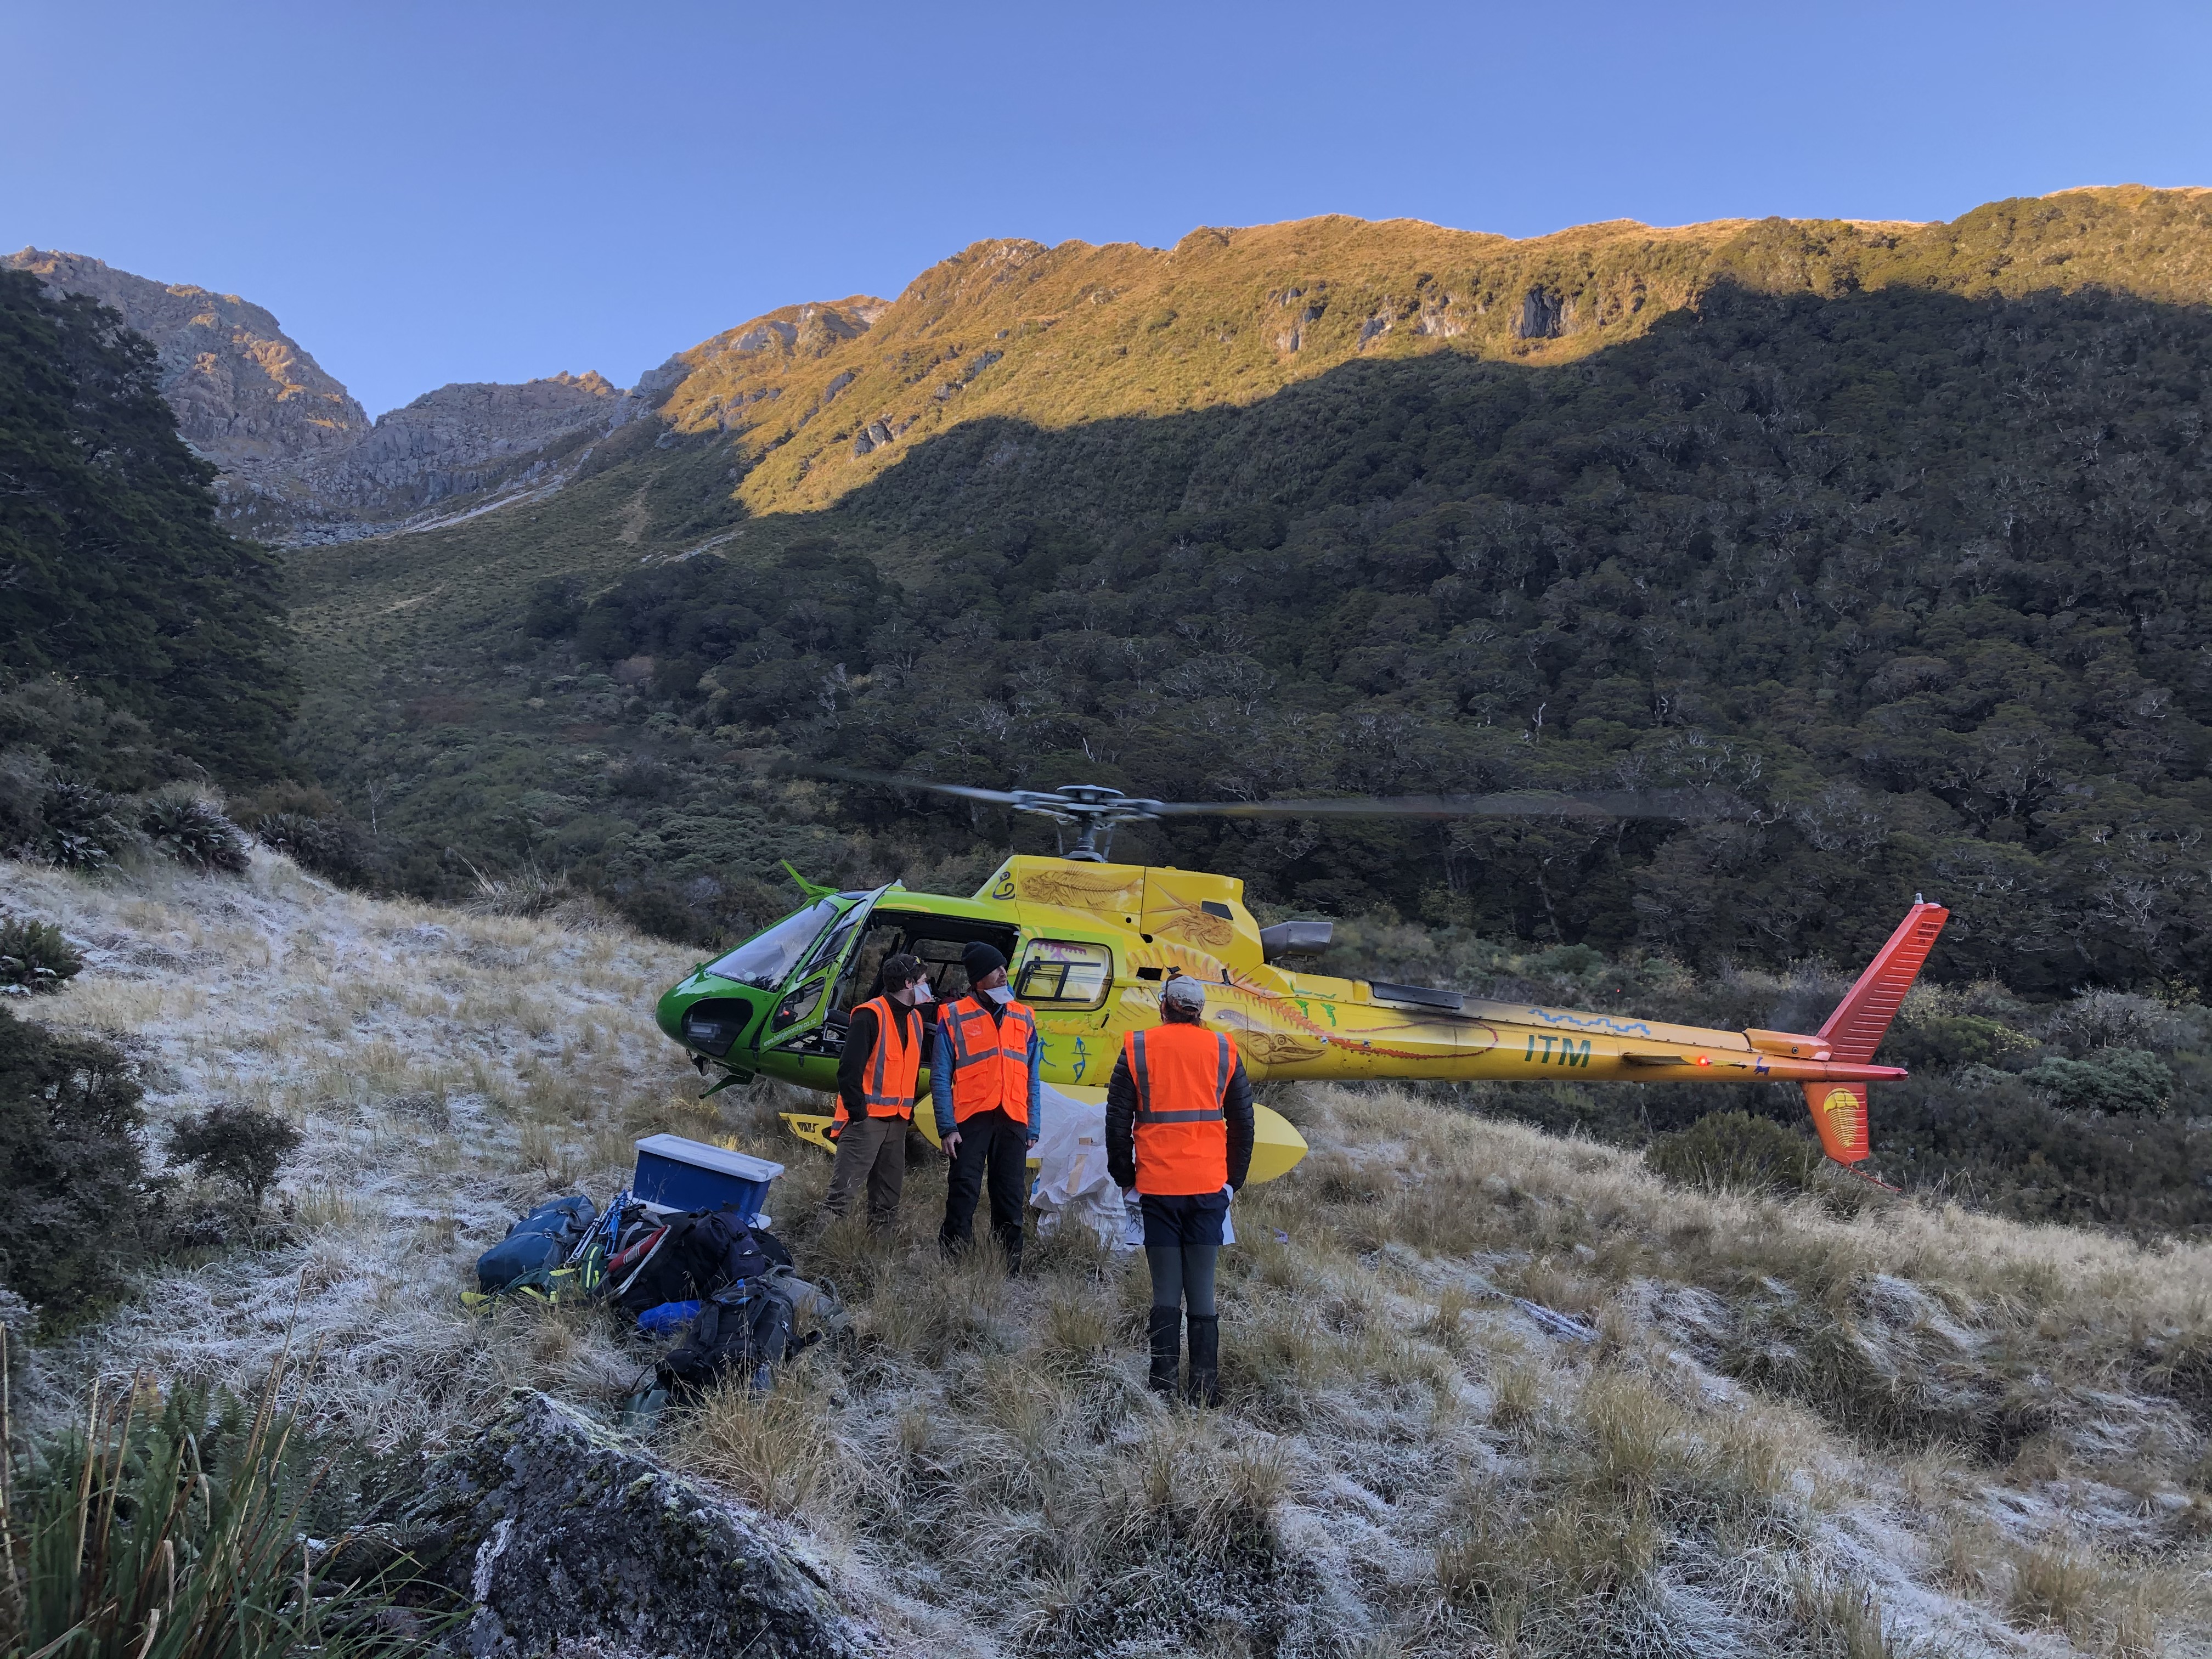 The research team standing near a helicopter as the sun rises on bush-clad mountains.